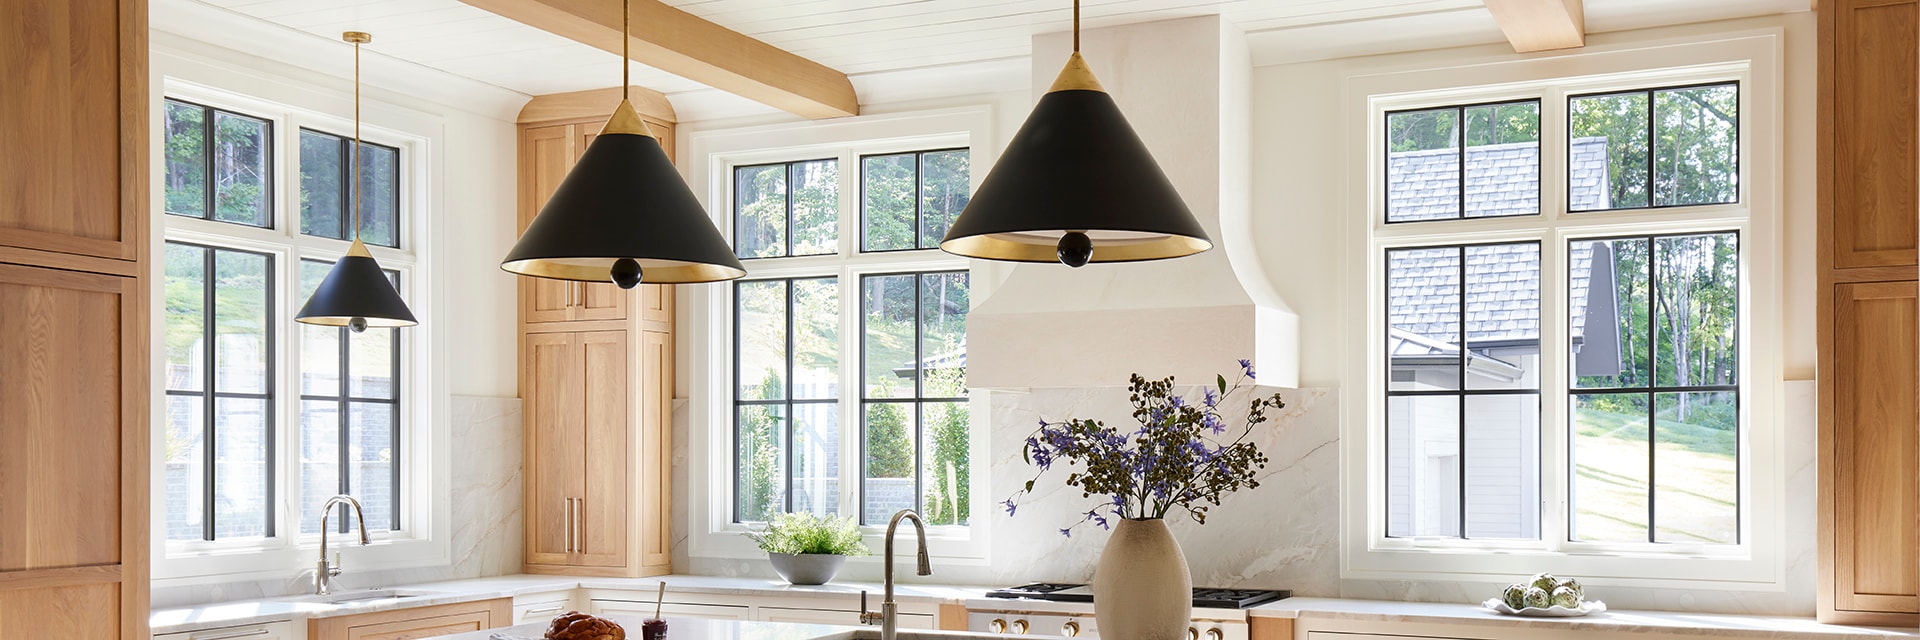 Three black lights hang over a large island with groupings of black casement windows behind.